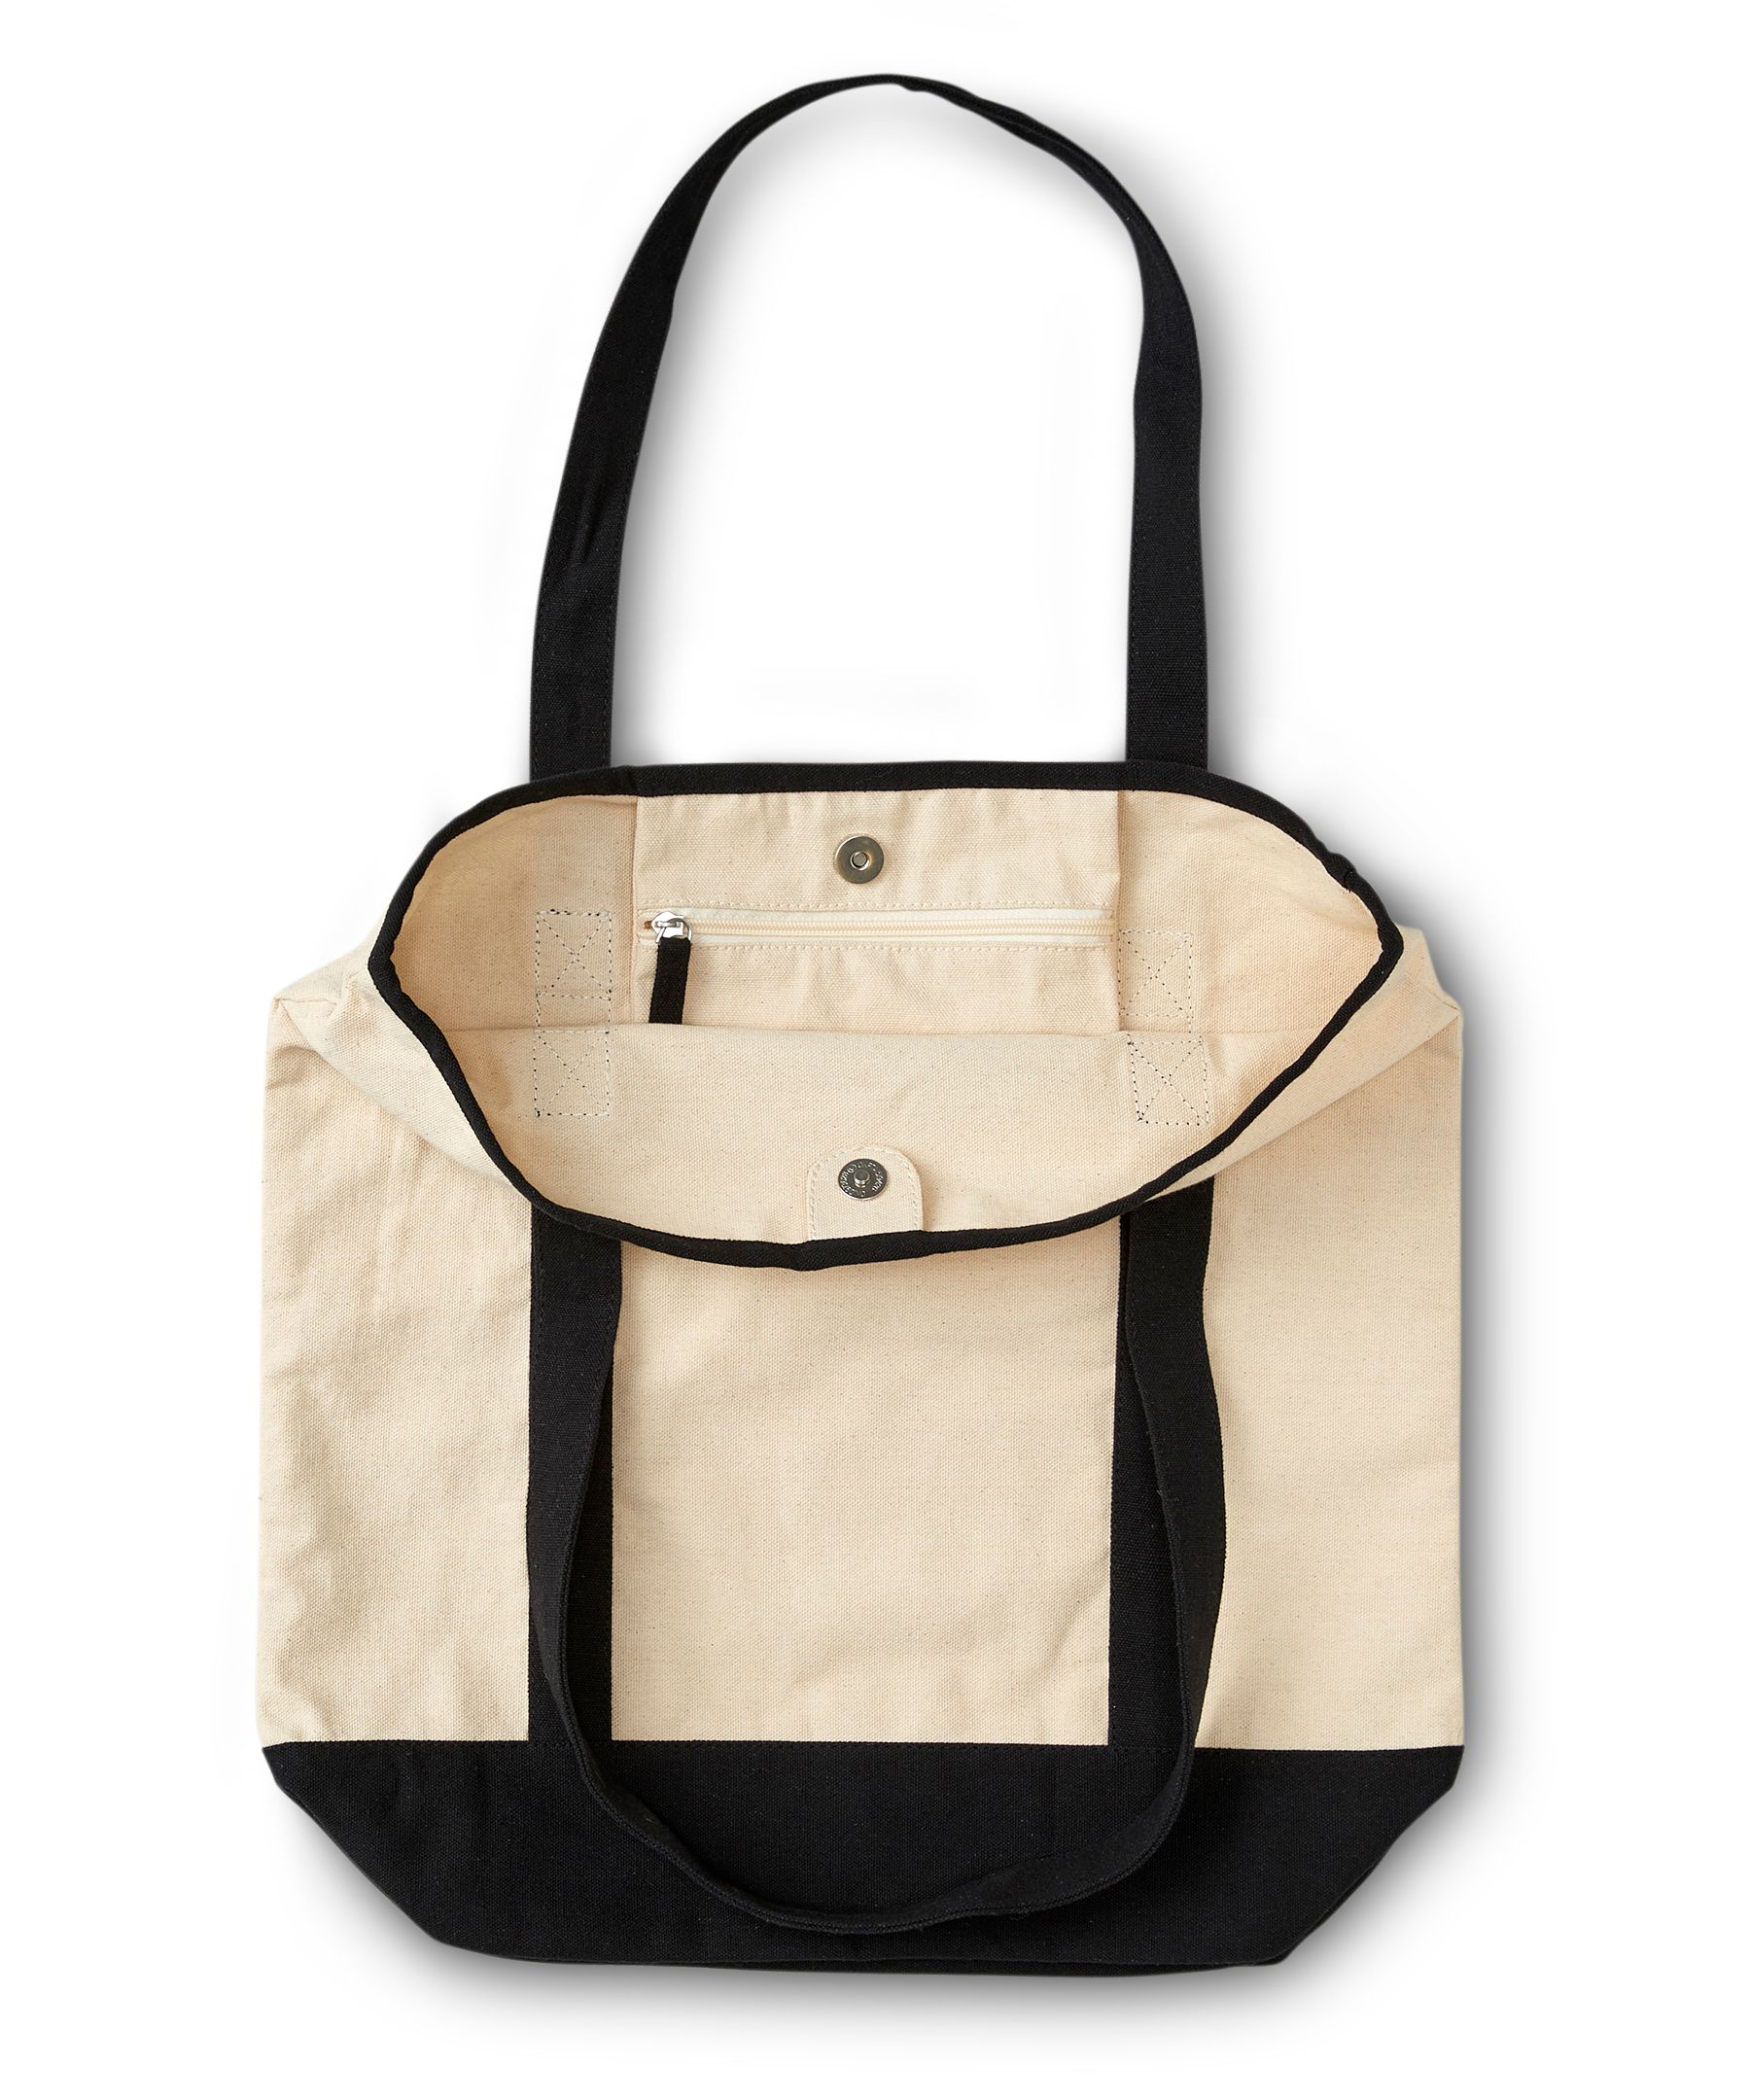 Denver Hayes Women's Canvas Tote Bag With Pockets